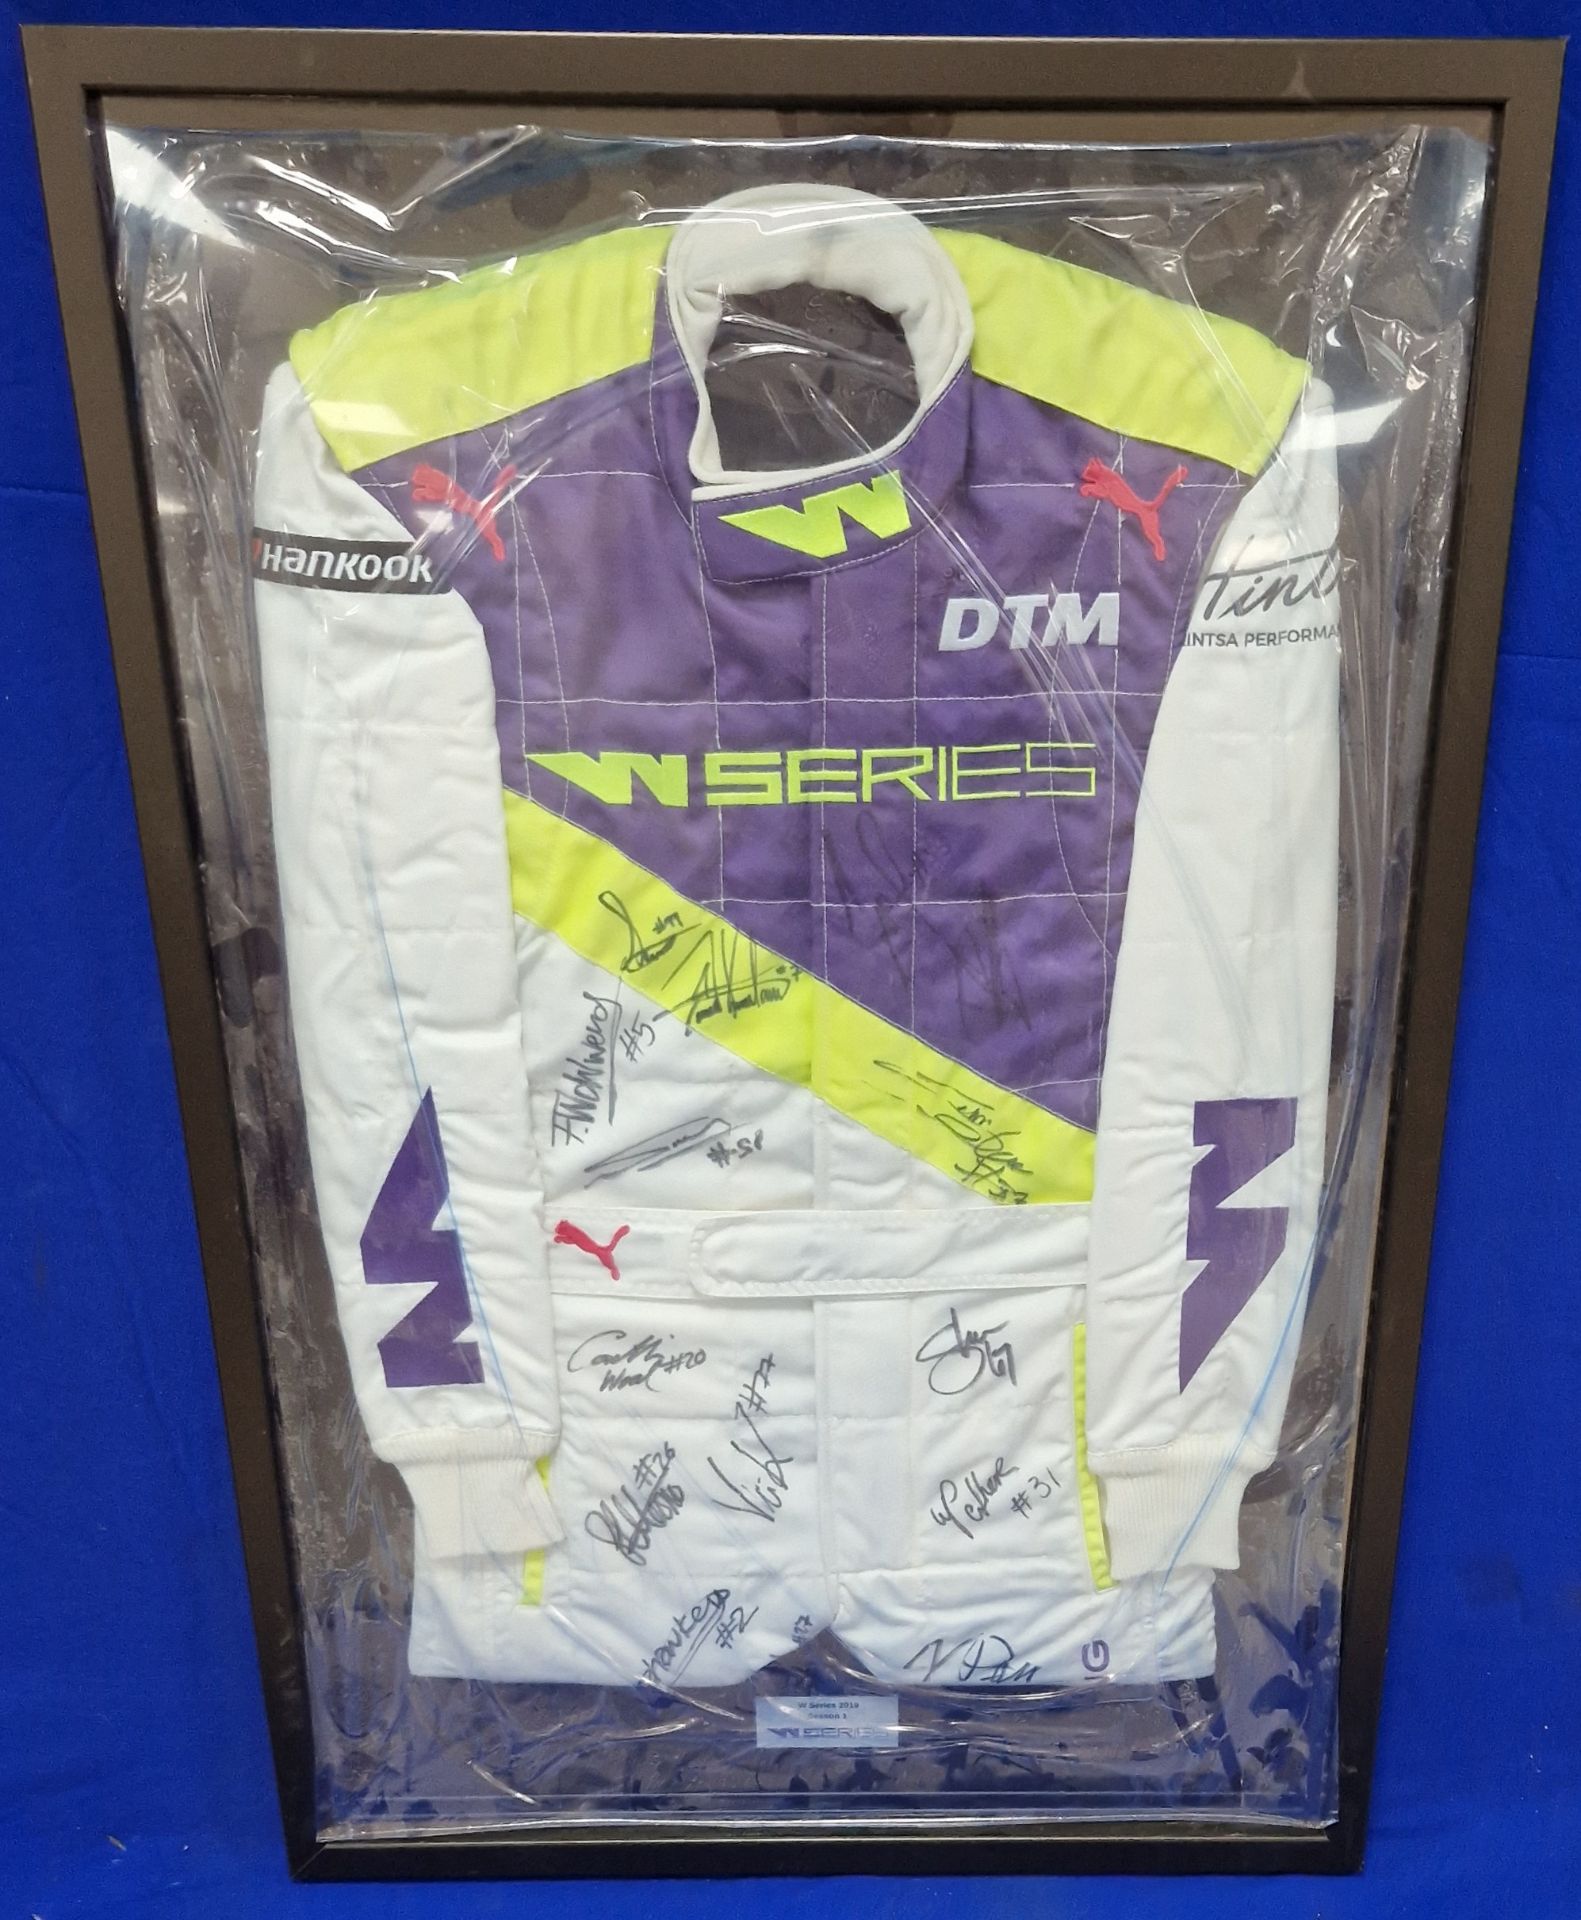 A Framed & Glazed (Perspex) W Series Race Suit Signed by The Drivers Commemorating the 2019 Series